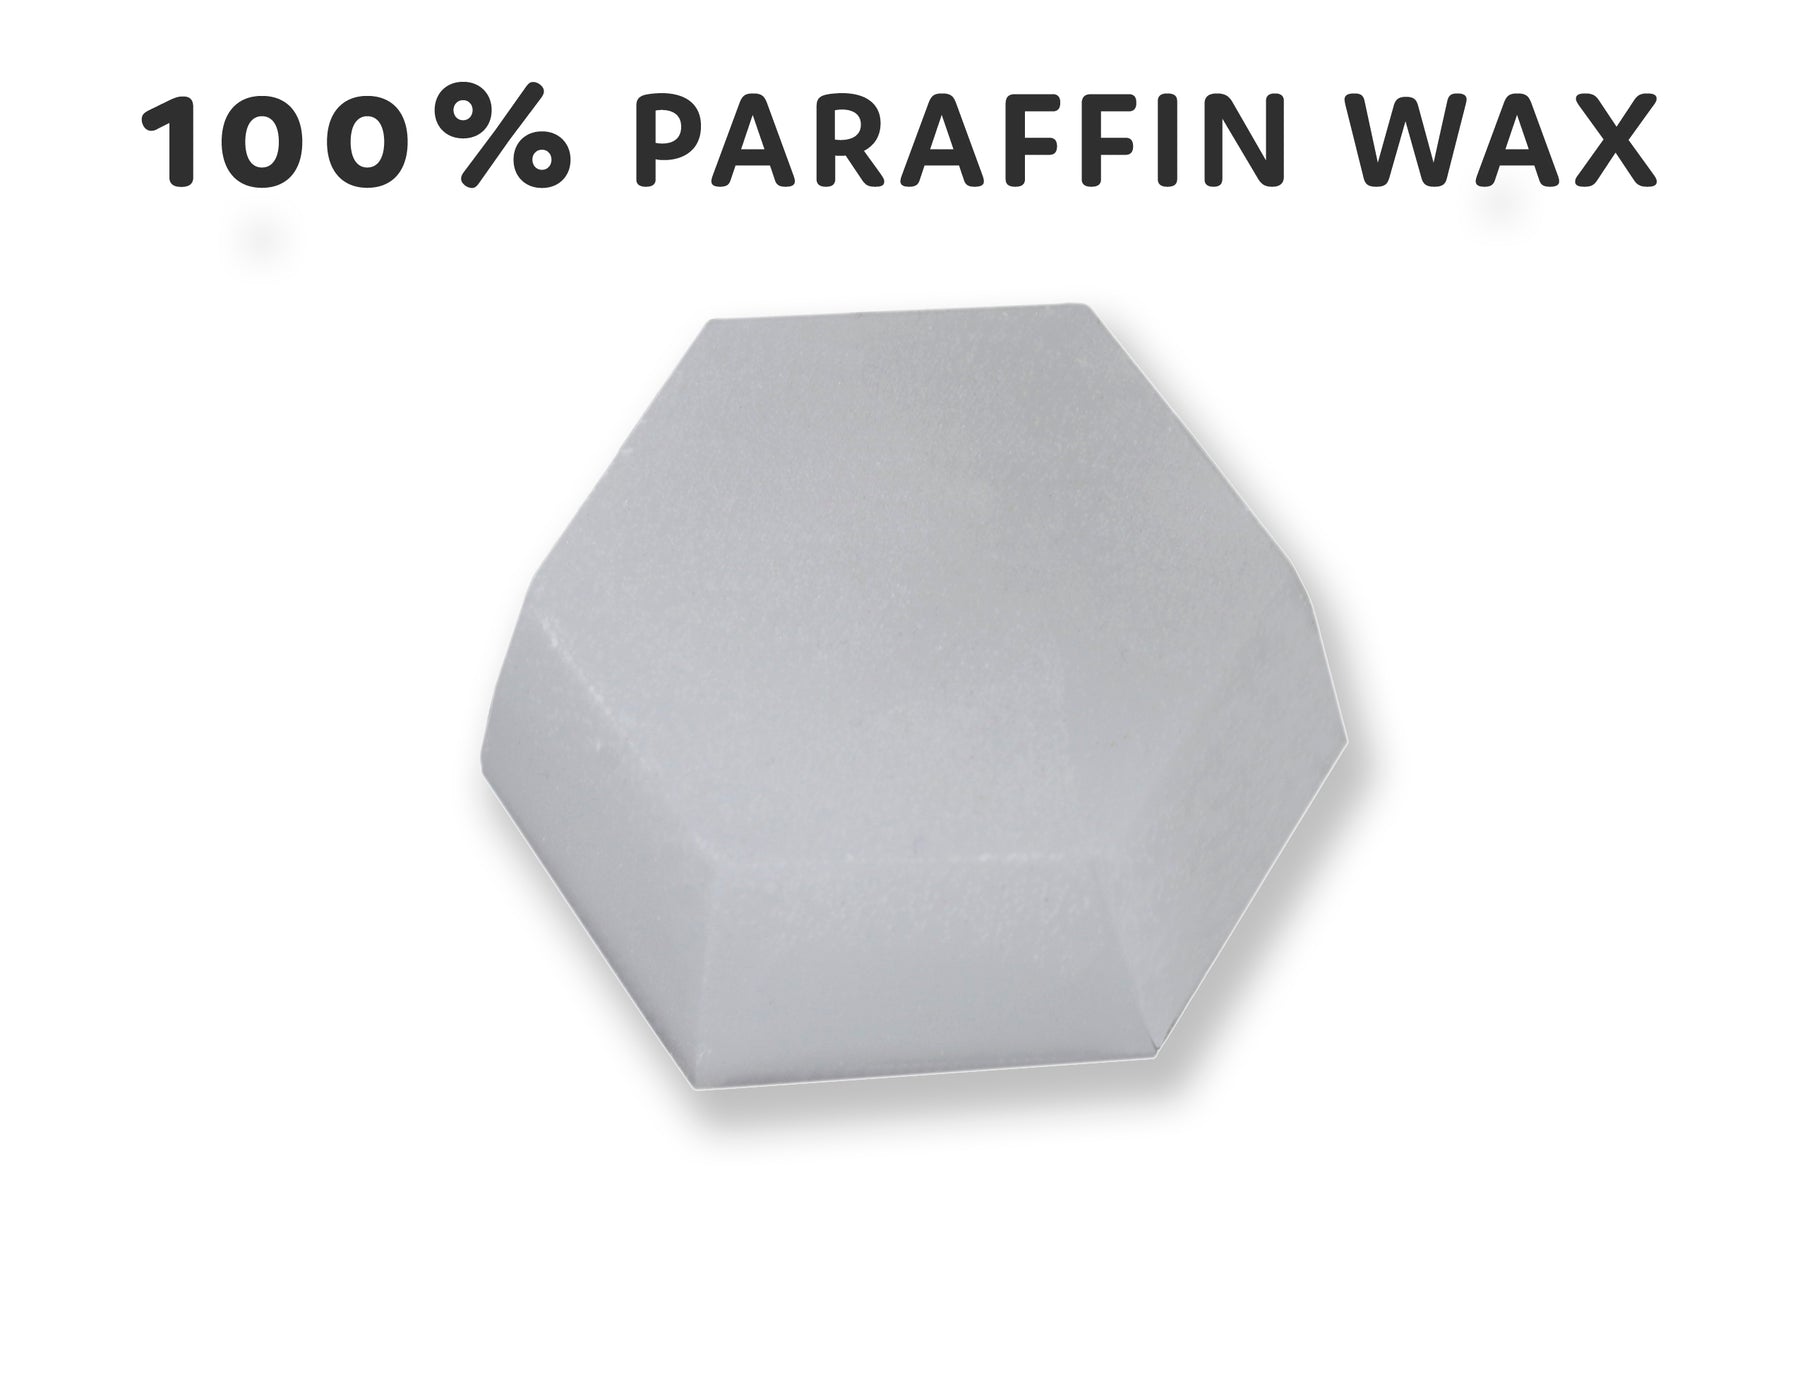 Wholesale paraffin wax lithuania For Home And Industrial Use 